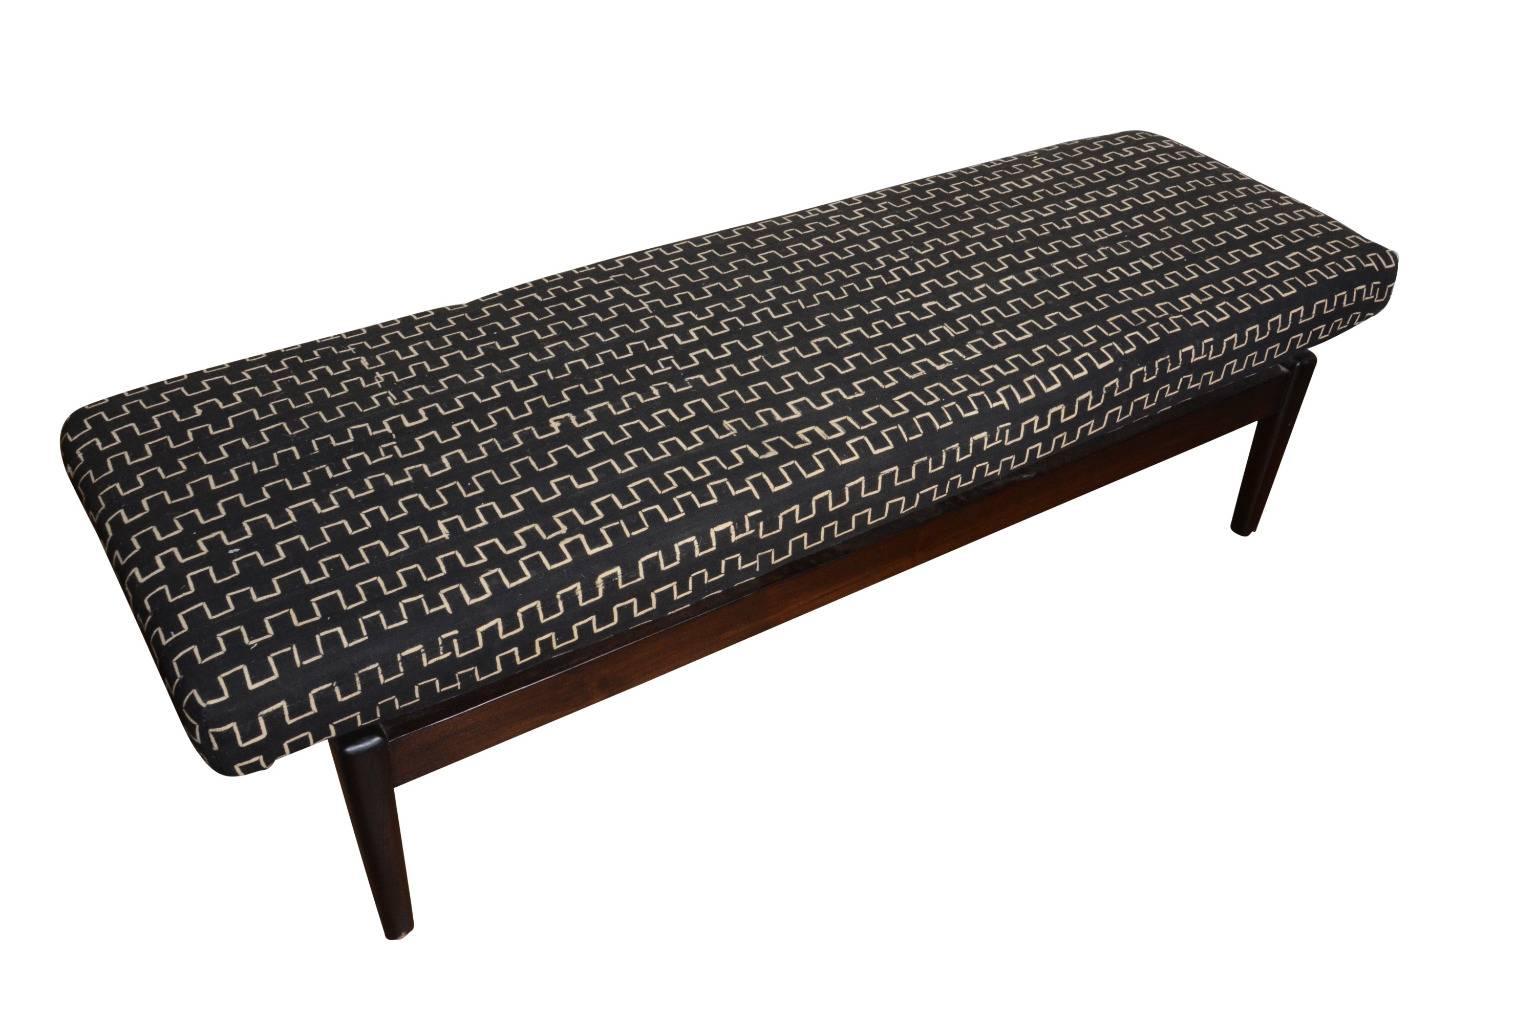 Contemporary bench upholstered in African mudcloth

Materials: Teak frame, mudcloth upholstery.